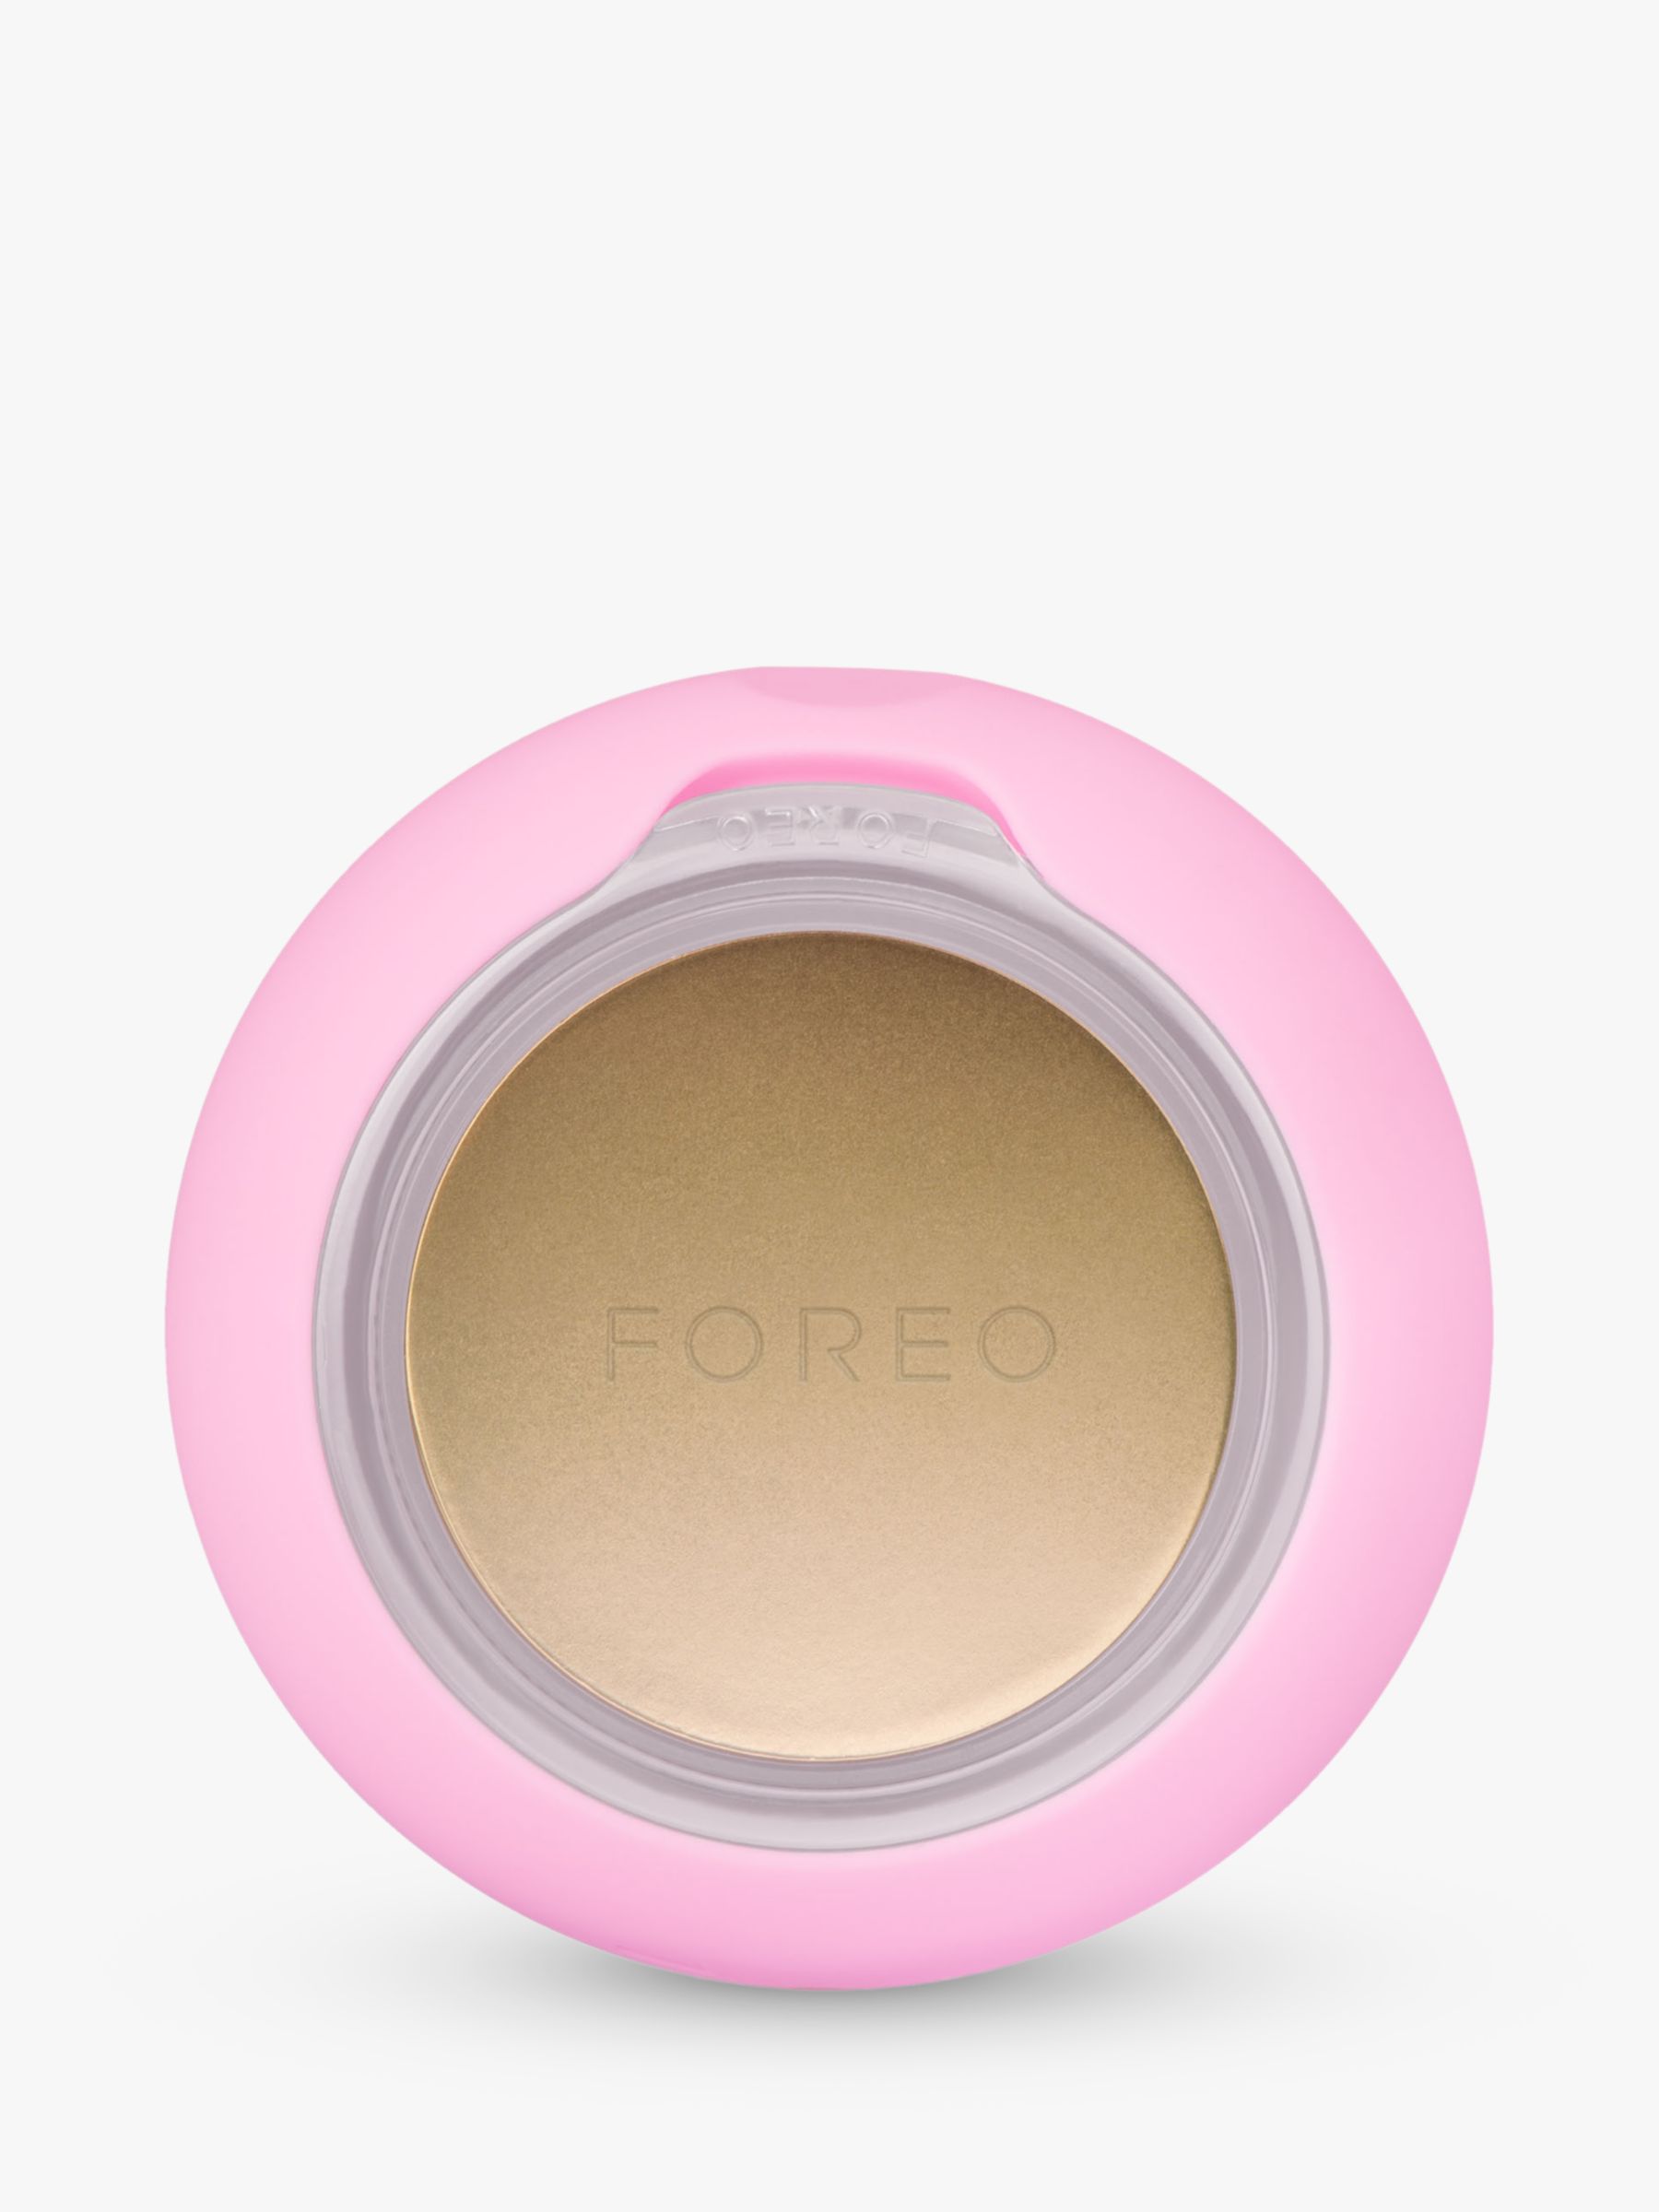 FOREO 2 Treatment Mask Pink UFO Power Pearl Device,